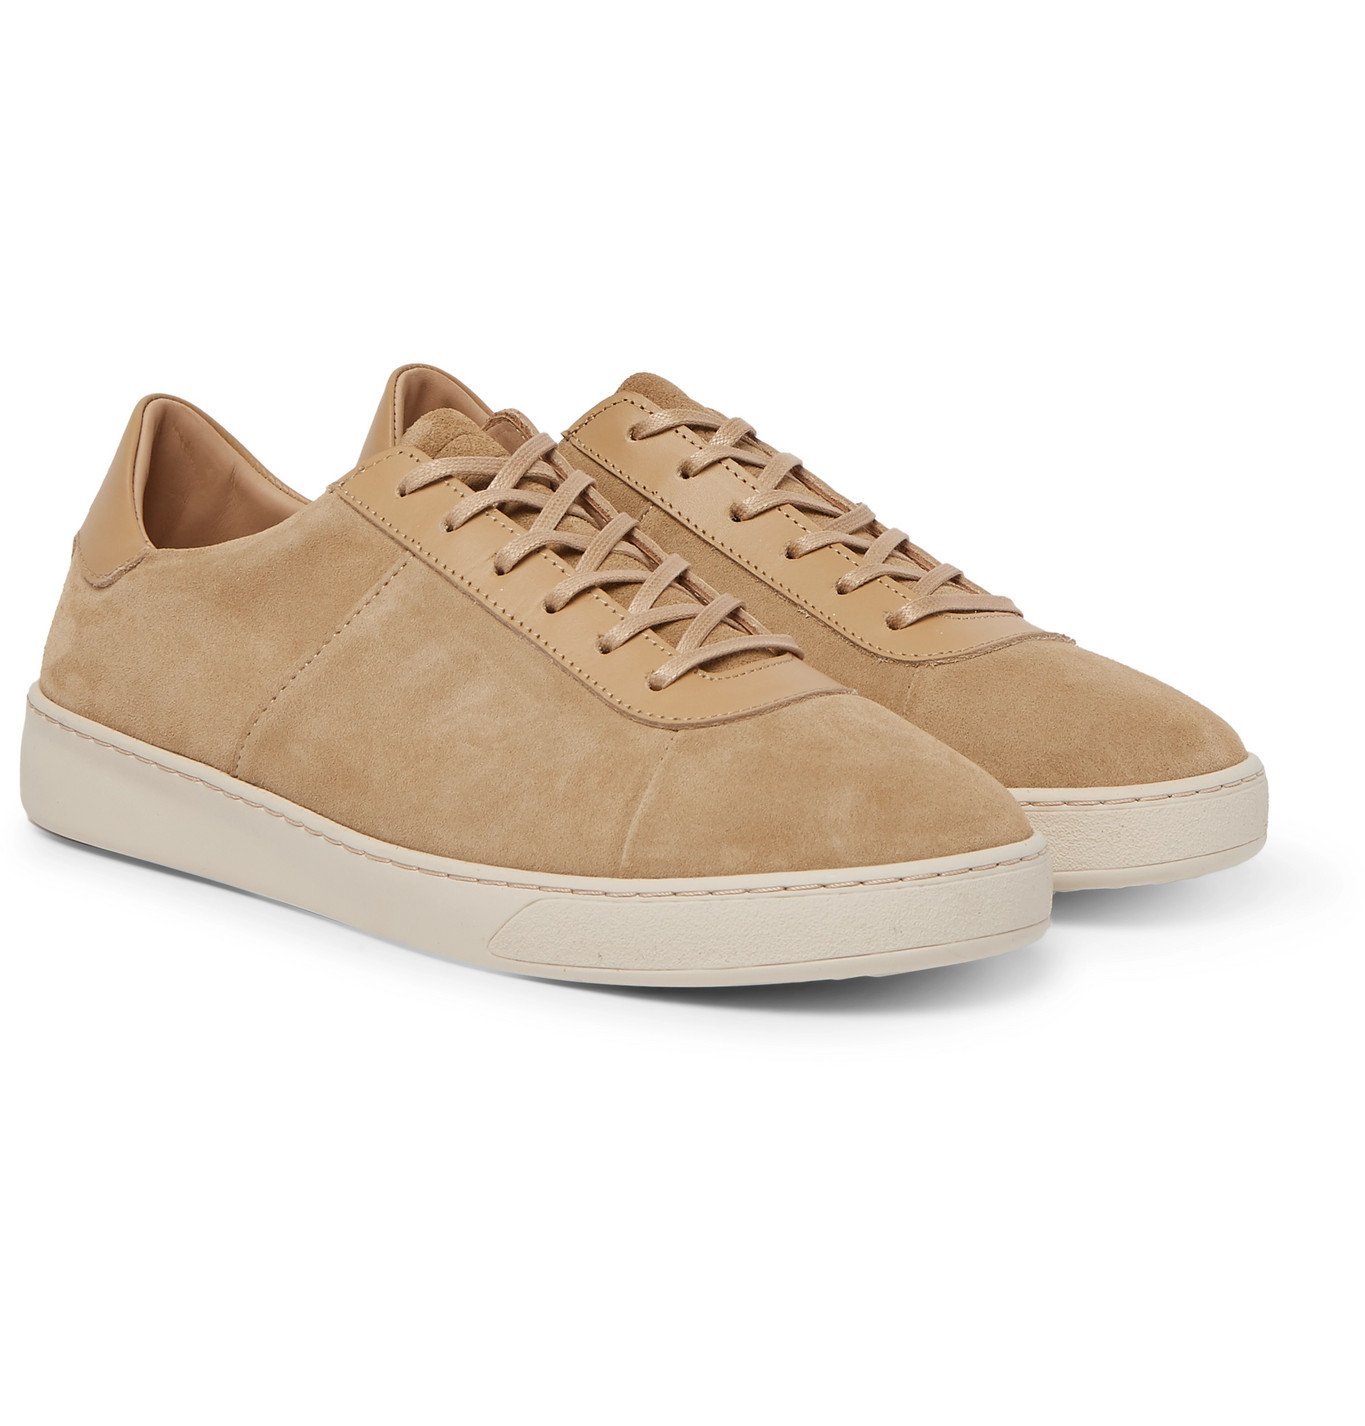 Mulo - Leather-Trimmed Suede Sneakers - Neutrals Mulo